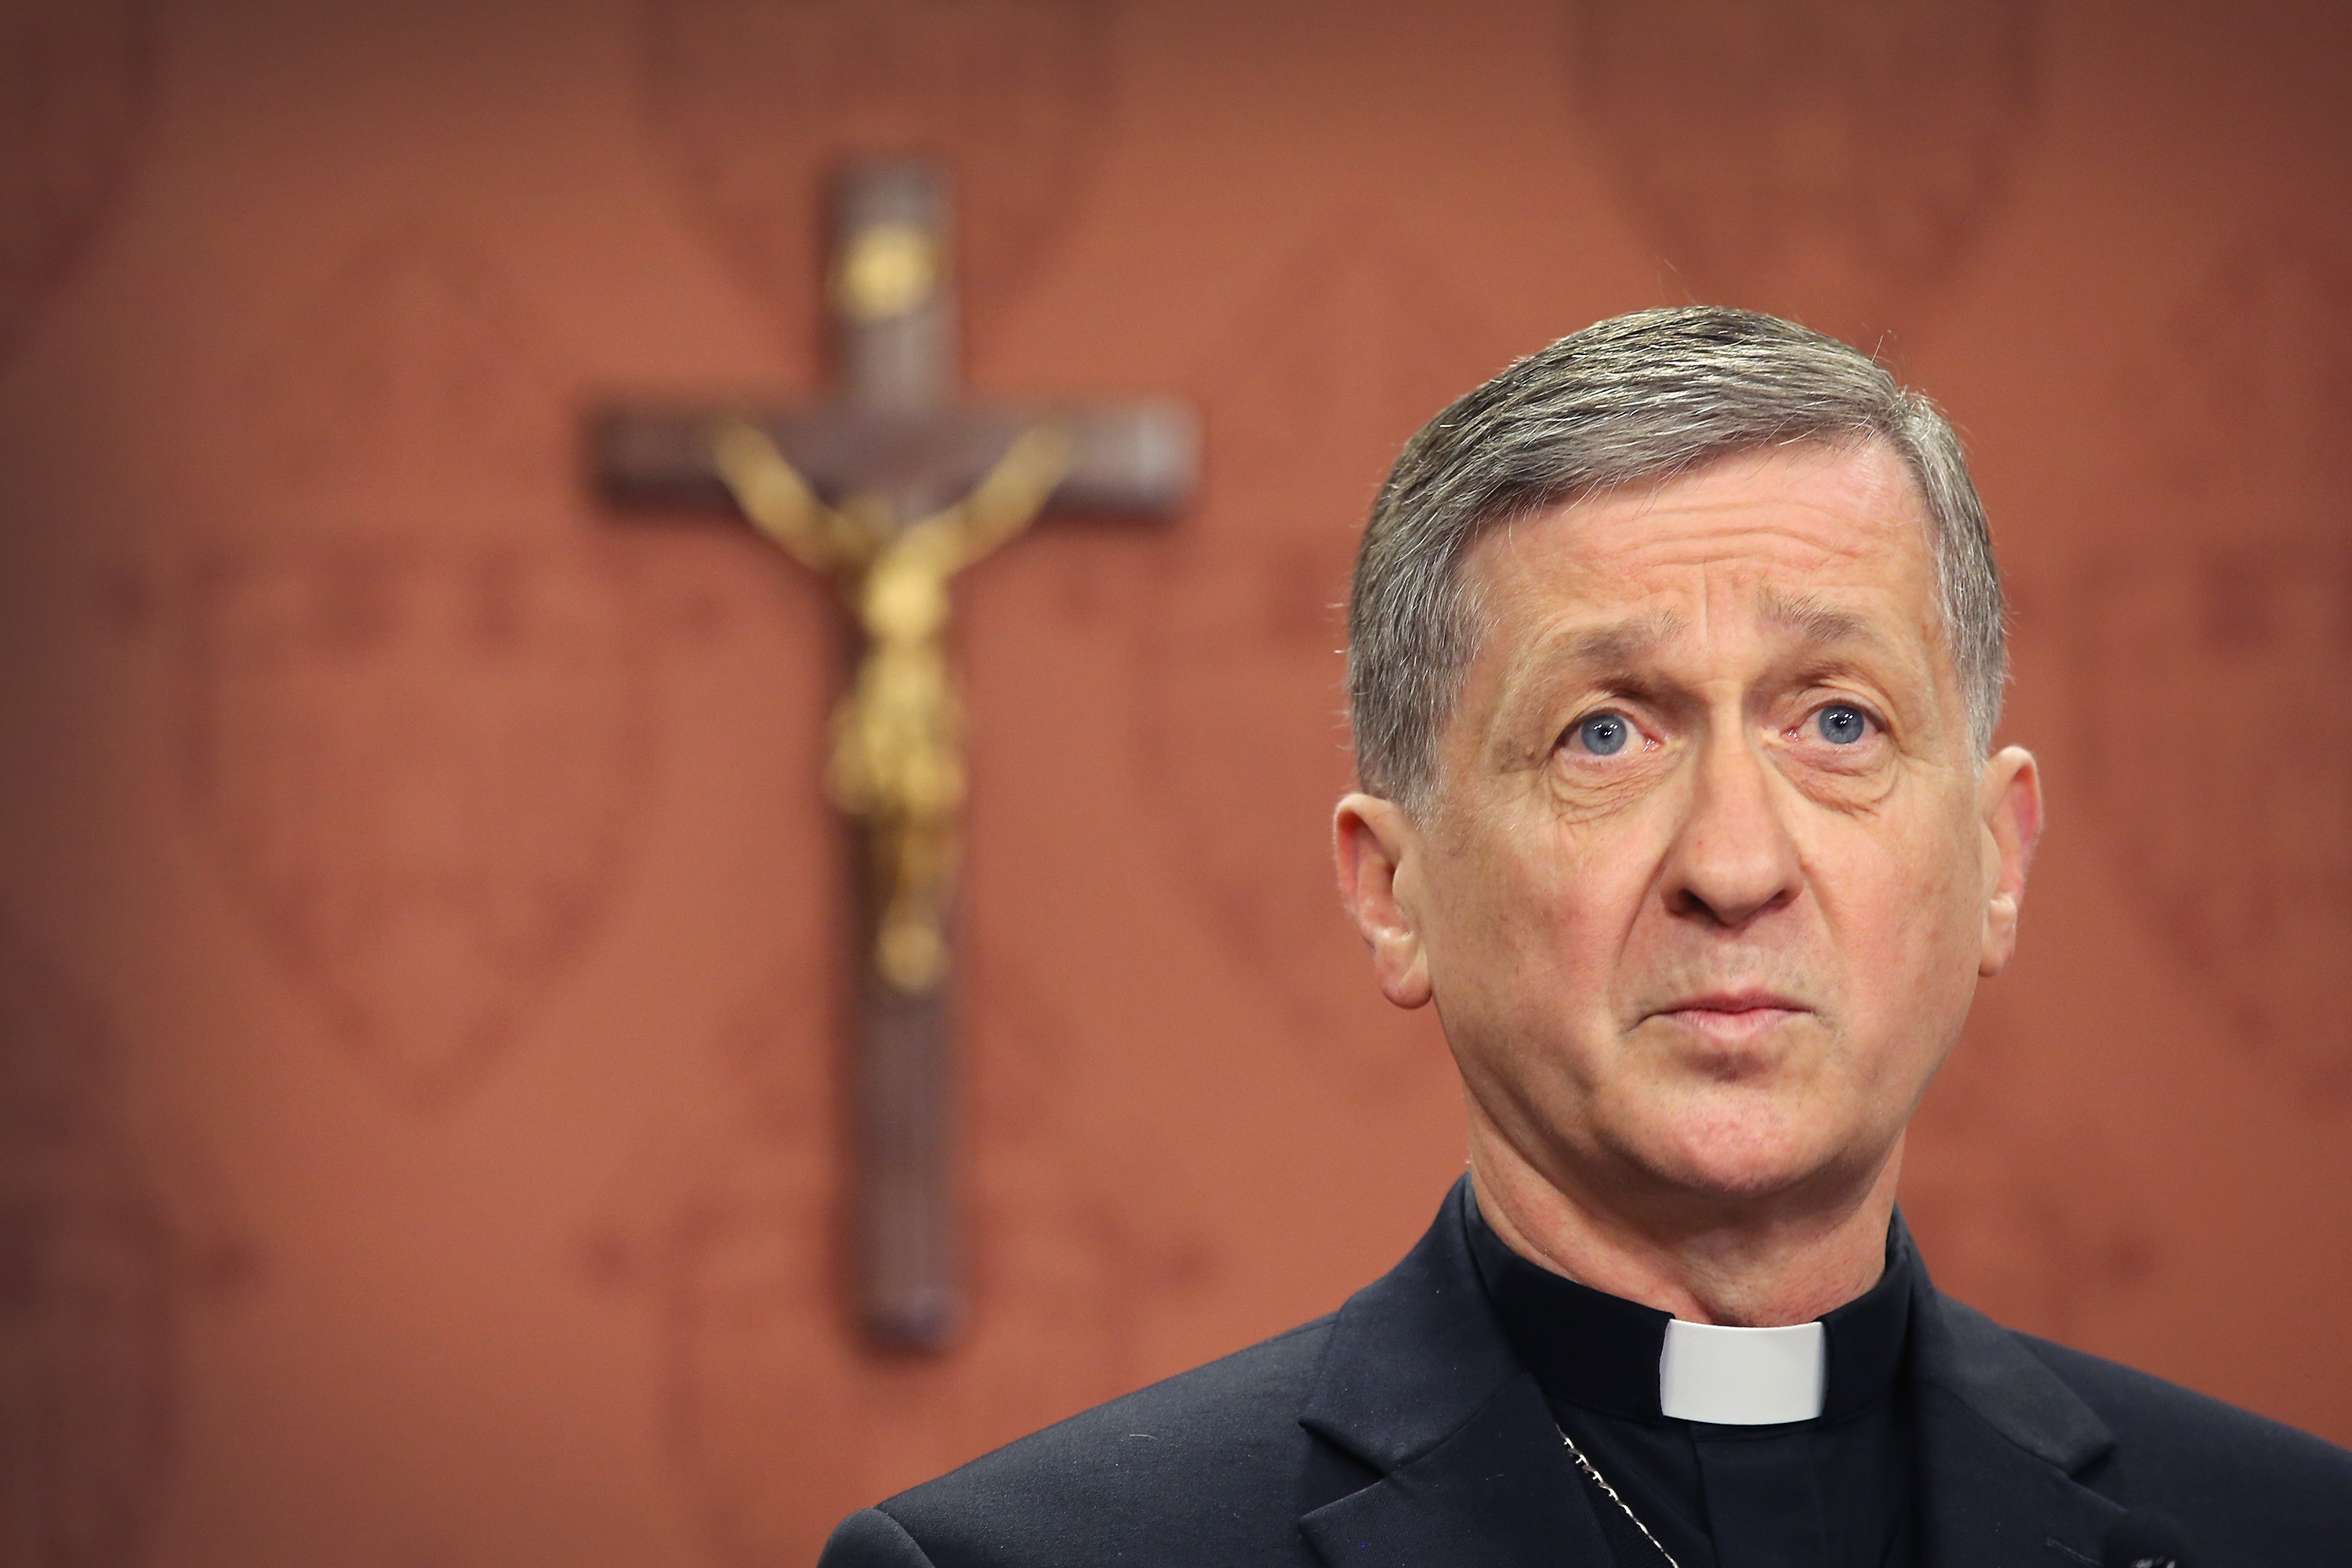 Archbishop-Elect Blase Cupich speaks to the press on September 20, 2014 in Chicago, Illinois. Cupich, who served as bishop in Spokane, Washington, will succeed Chicago's Francis Cardinal George, who has been fighting a long battle with cancer, to become the 9th archbishop of Chicago. This is the first time in the history of the Chicago Archdiocese that a new leader has been appointed while the former is still alive. (Scott Olson&mdash;Getty Images)